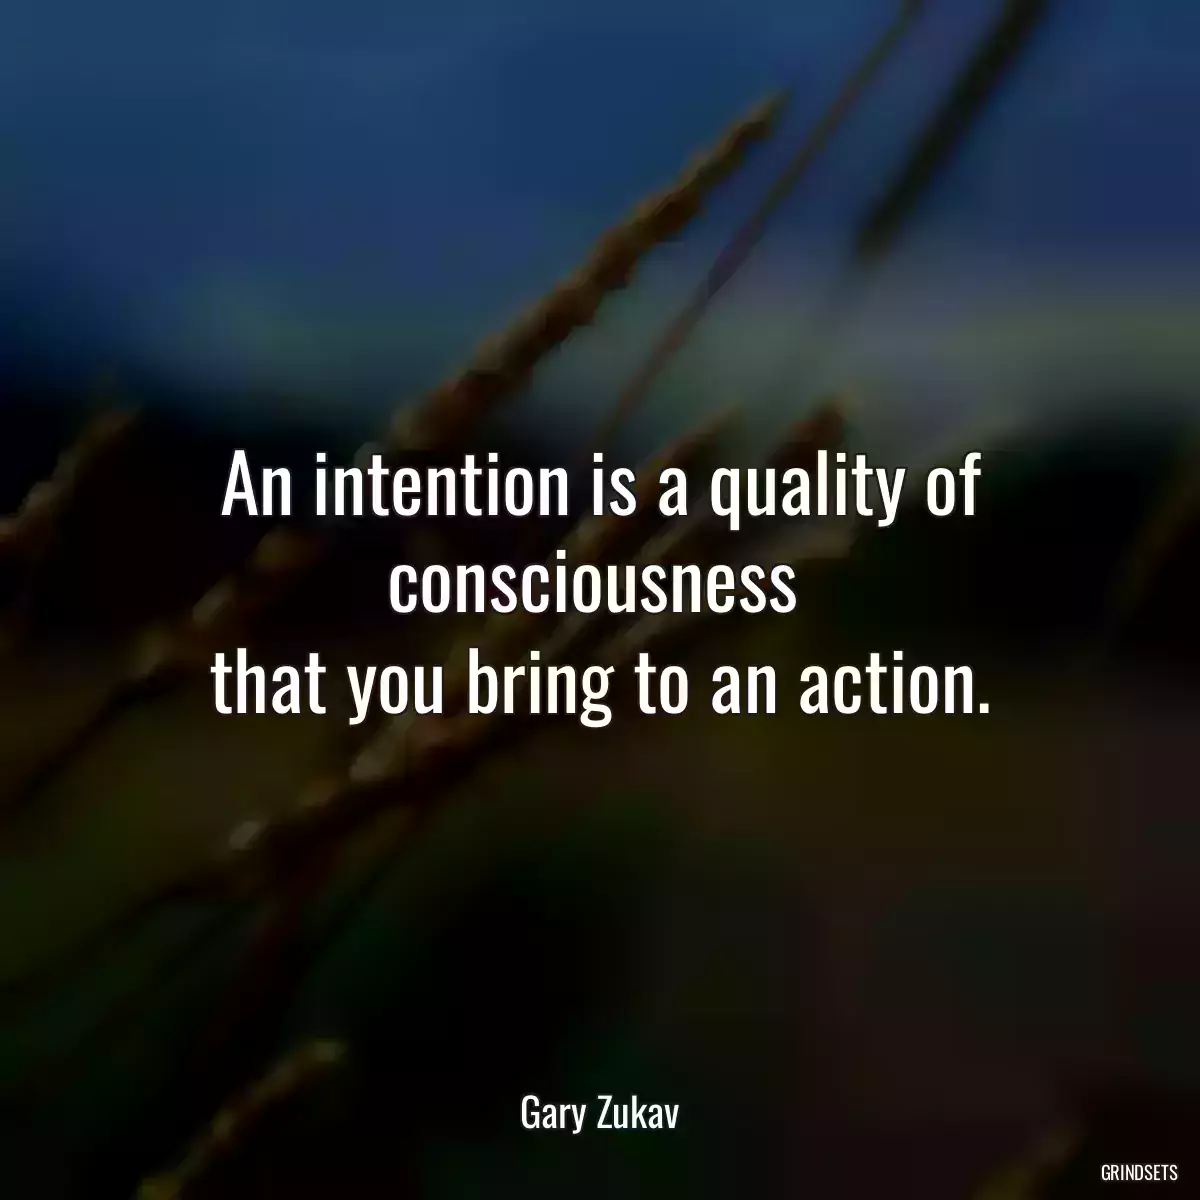 An intention is a quality of consciousness 
that you bring to an action.